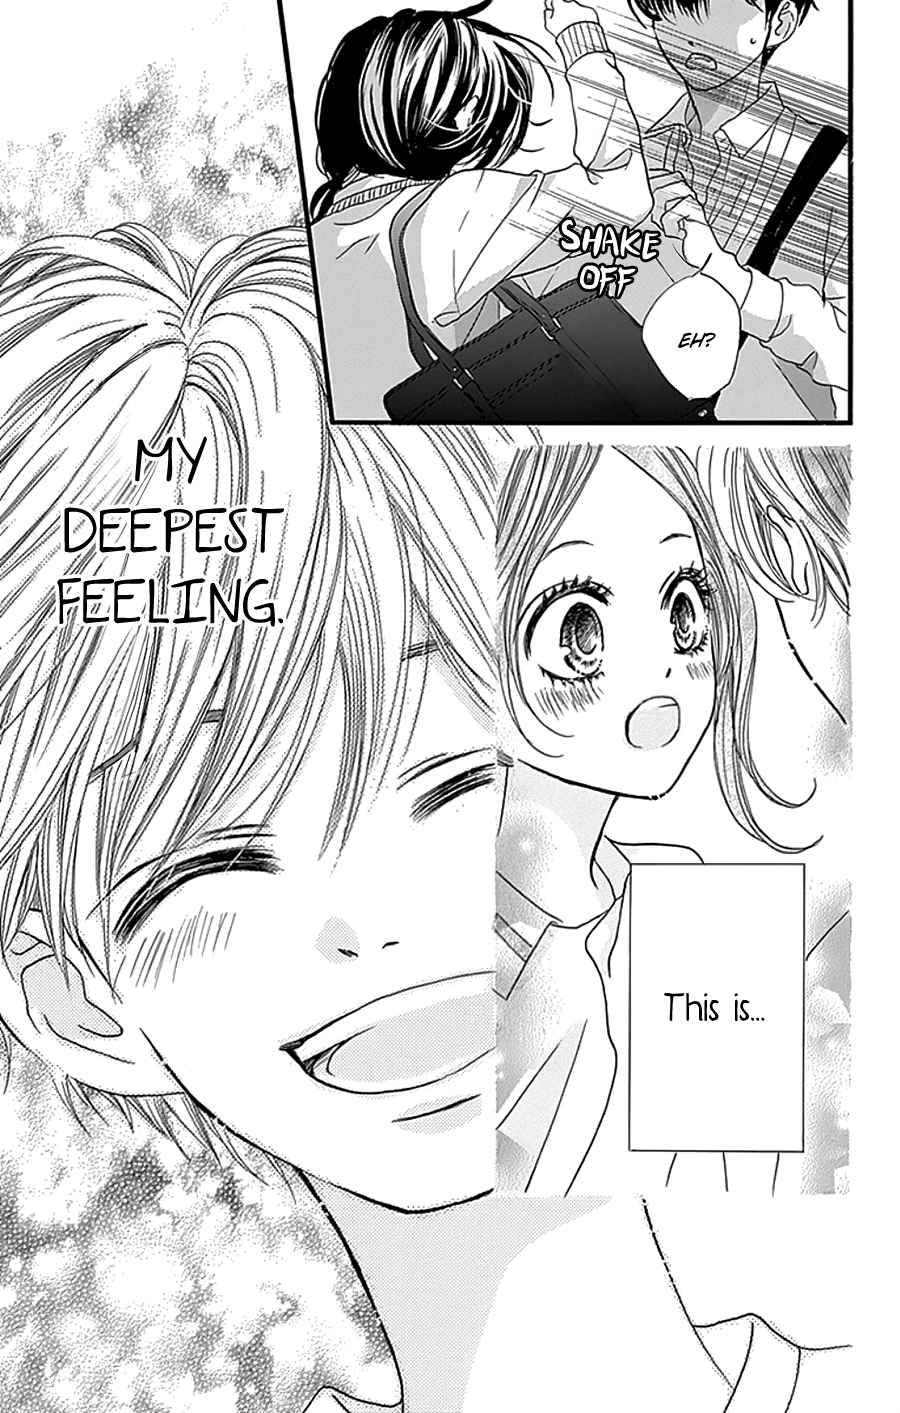 I Love You Baby Vol. 3 Ch. 16